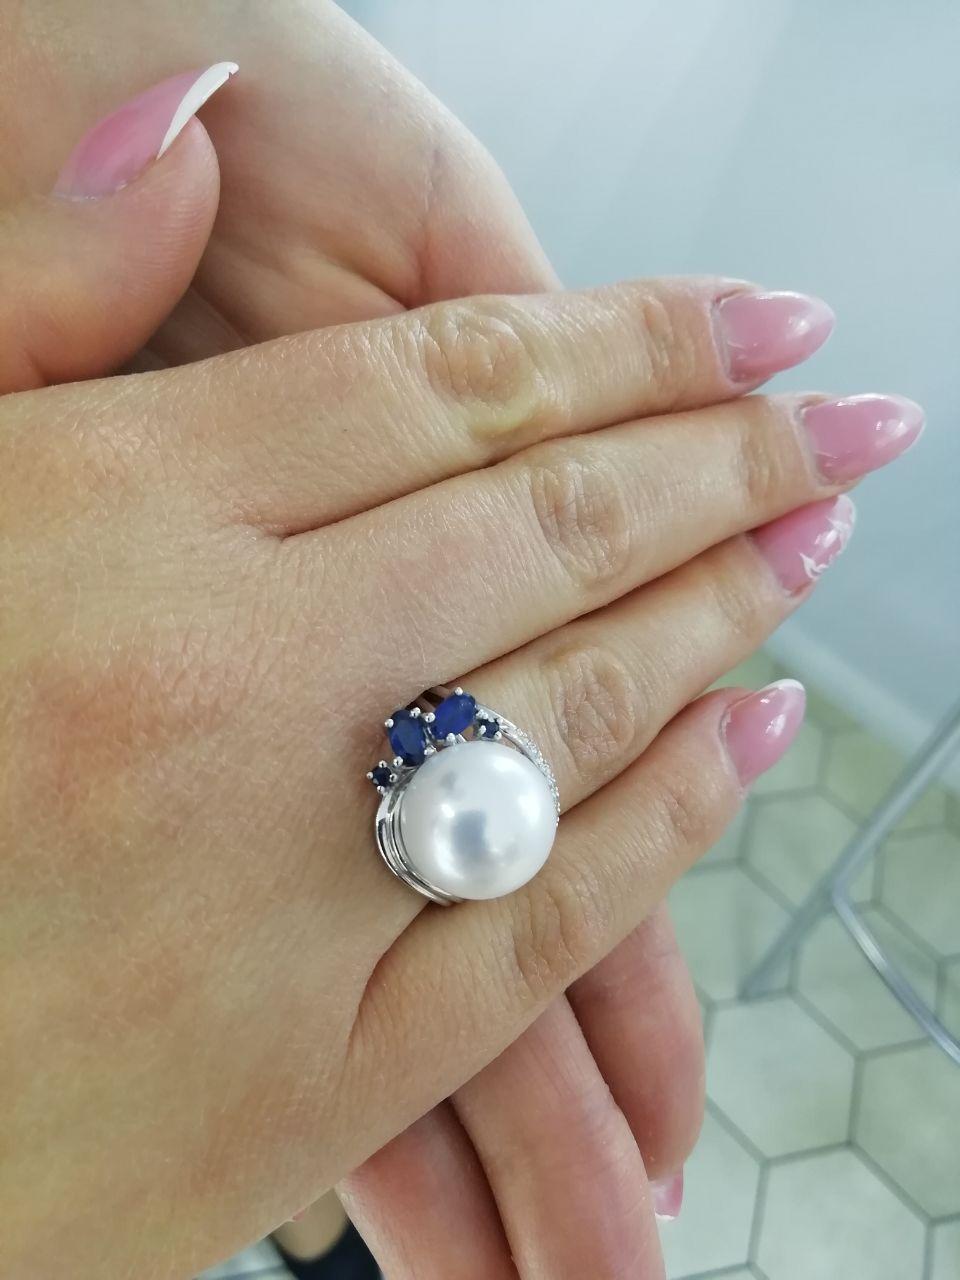 Ring White Gold 14 K (Matching Earrings Available)
Diamond 7-Round 57-0,03-5/5A
Pearl d12,5-13,0 1-11,27 ct
Blue Sapphire 2-Oval-0,54 (5)/5
Blue Sapphire 2-Round-0,08 (5)
Weight 5.64 grams
Size 16

With a heritage of ancient fine Swiss jewelry